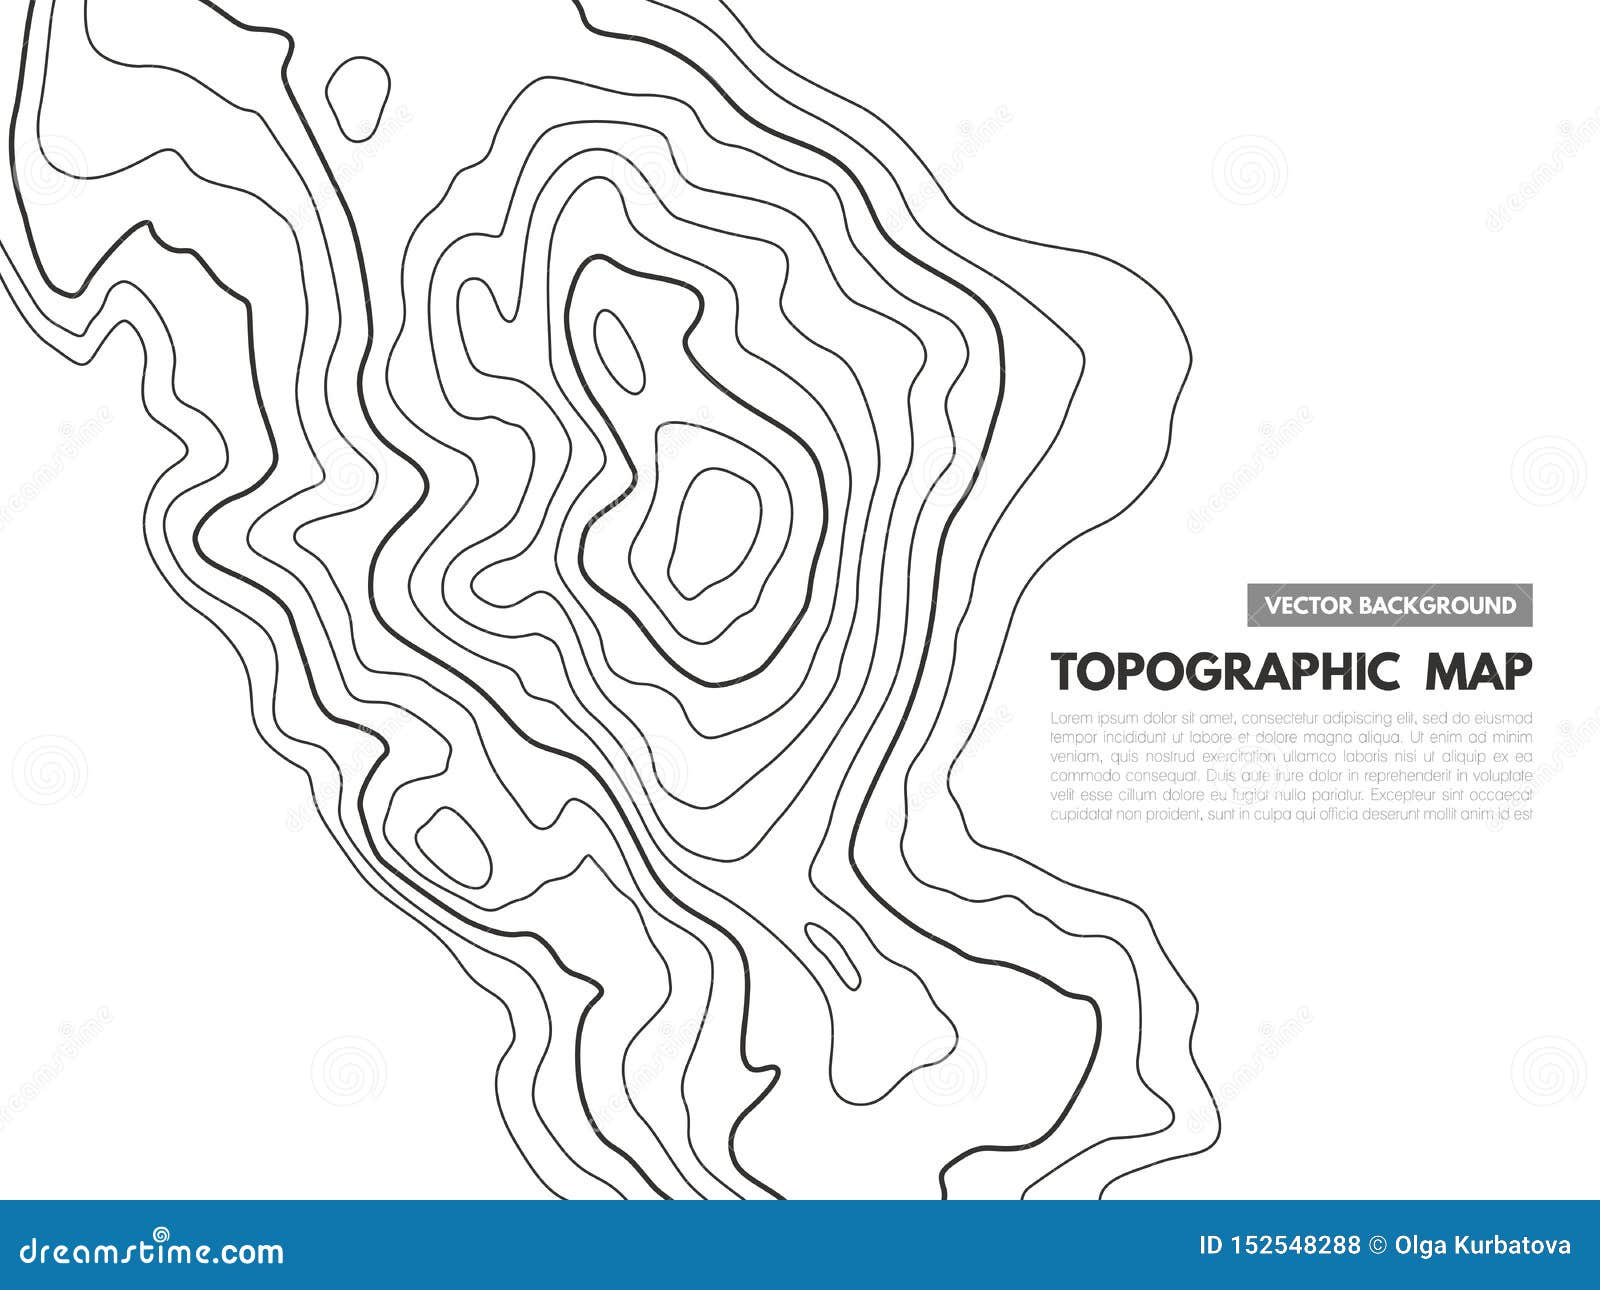 Contour Line Map Topographical Relief Outline Cartography